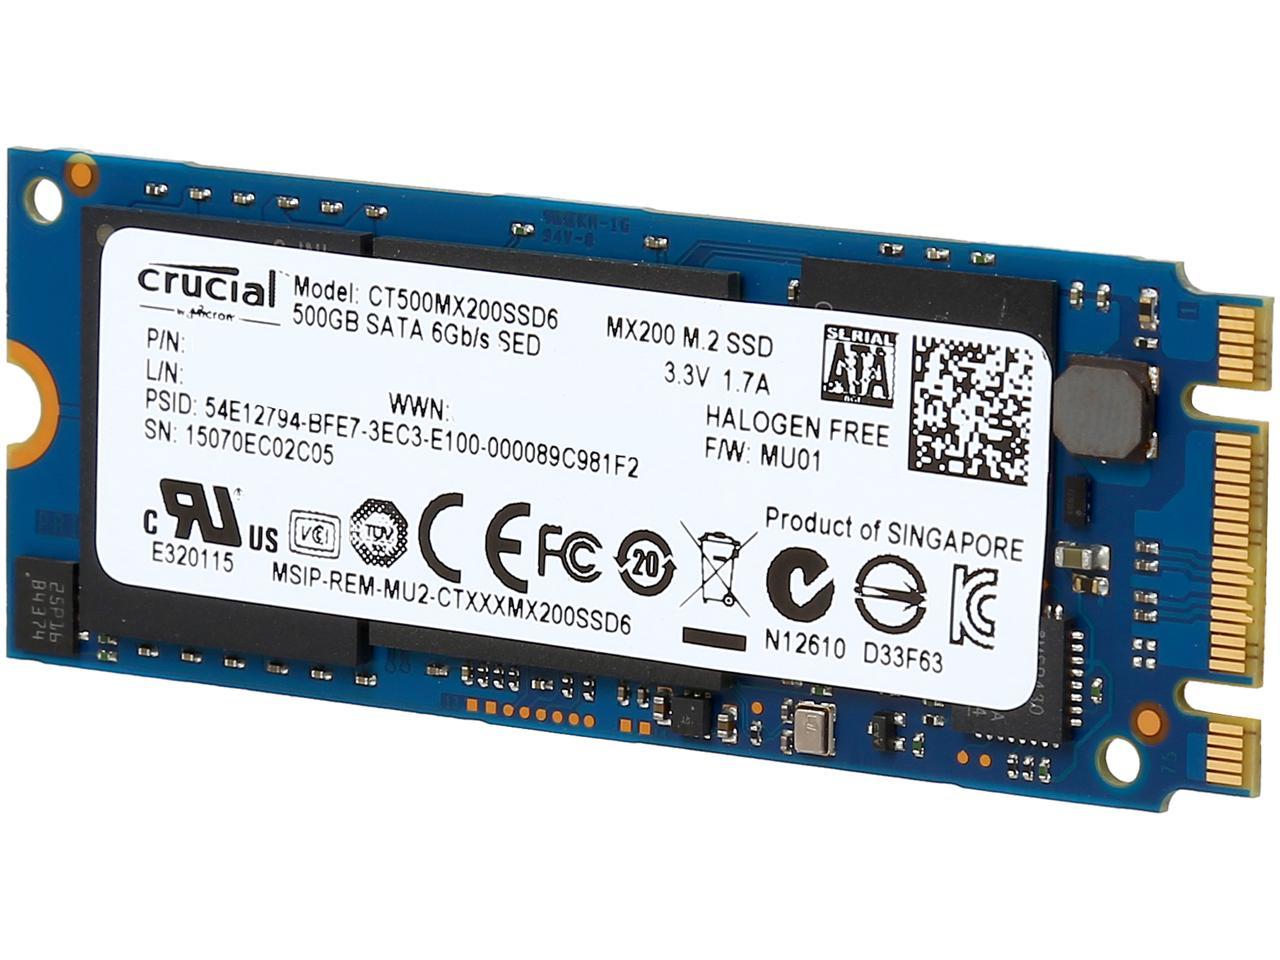 Crucial MX200 M.2 Type 2260DS (Double Sided) 500GB SATA 6Gbps (SATA III)  Micron 16nm MLC NAND Internal Solid State Drive (SSD) CT500MX200SSD6